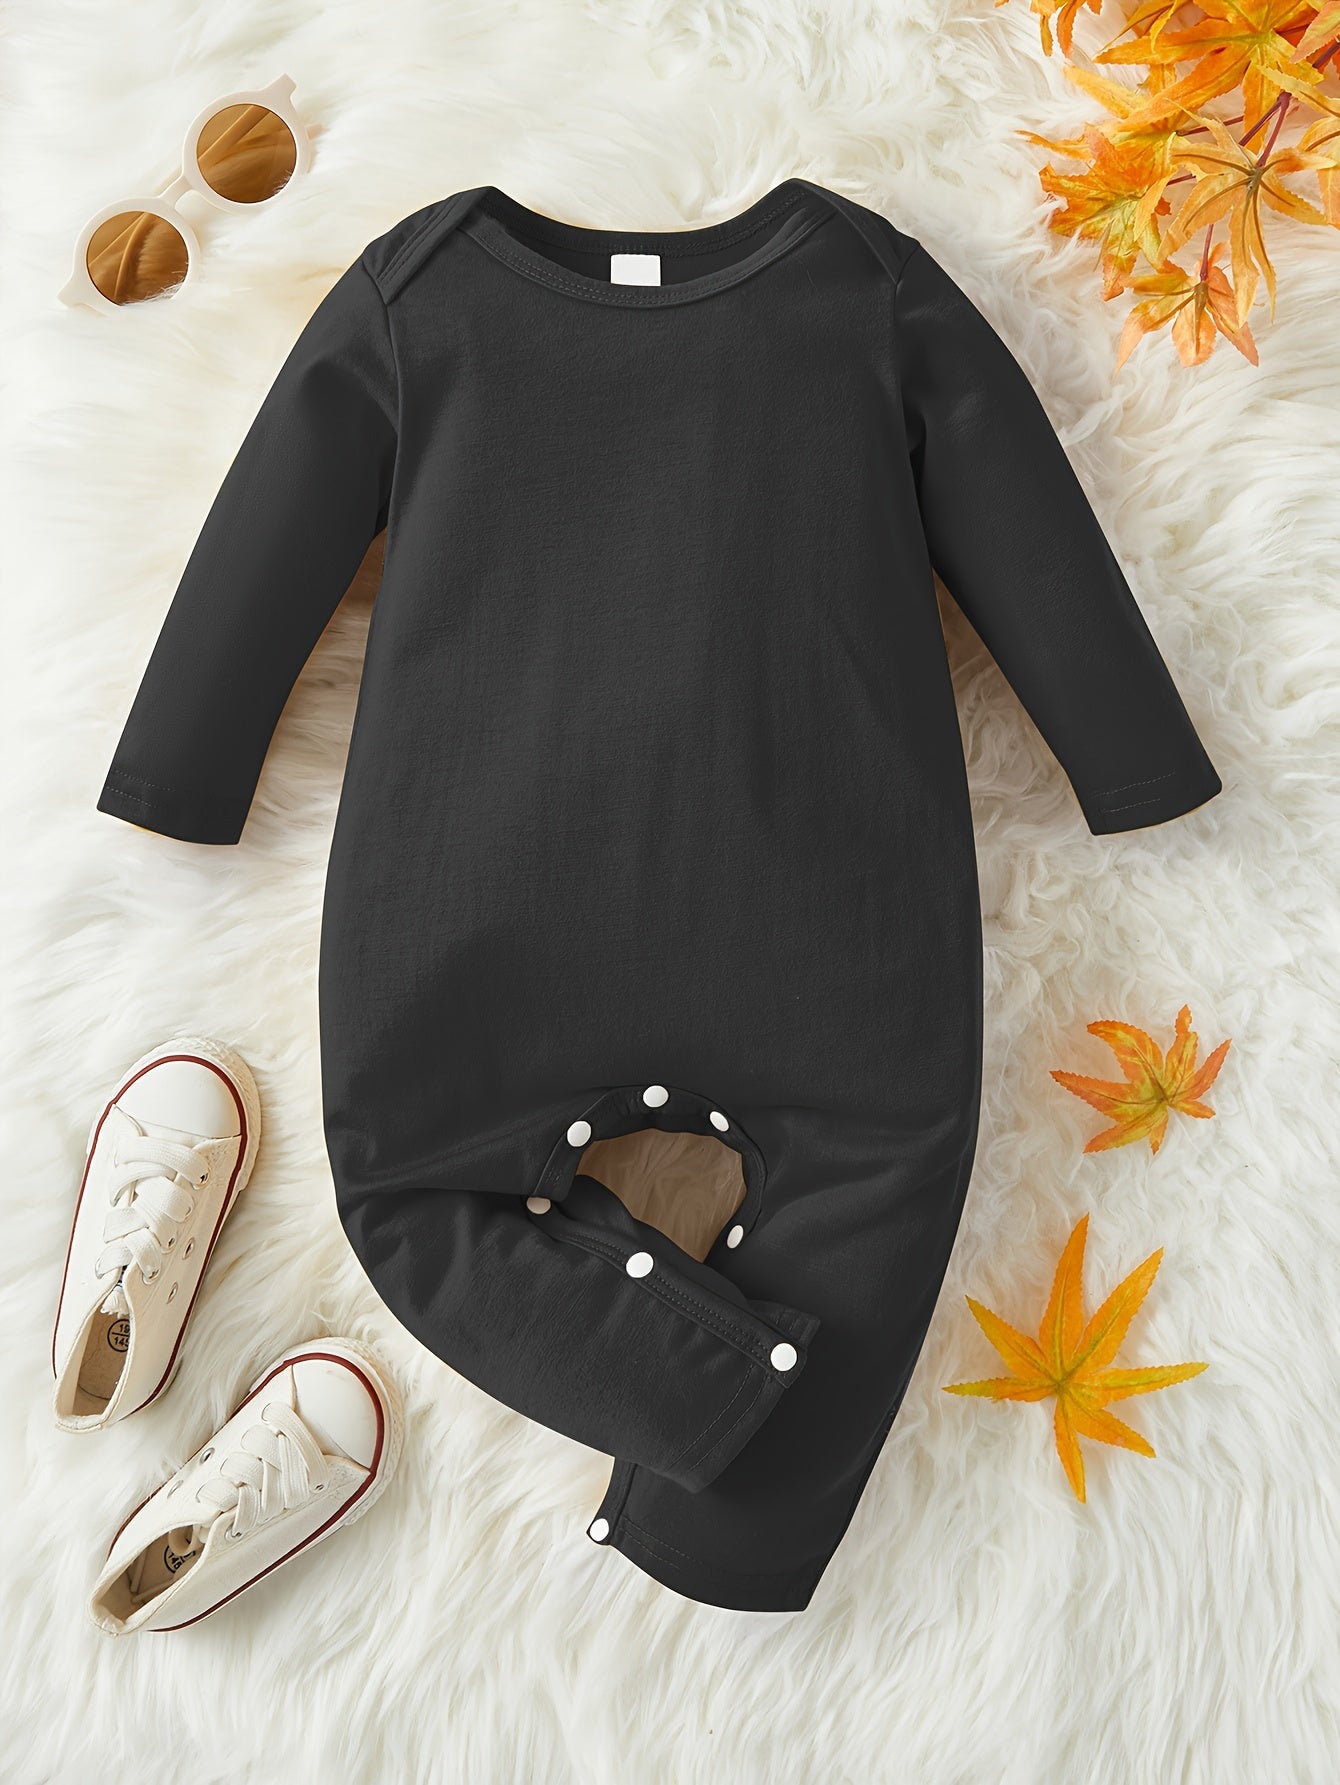 Baby Toddler's Basic Romper, Long Sleeve Casual Triangle Jumpsuit